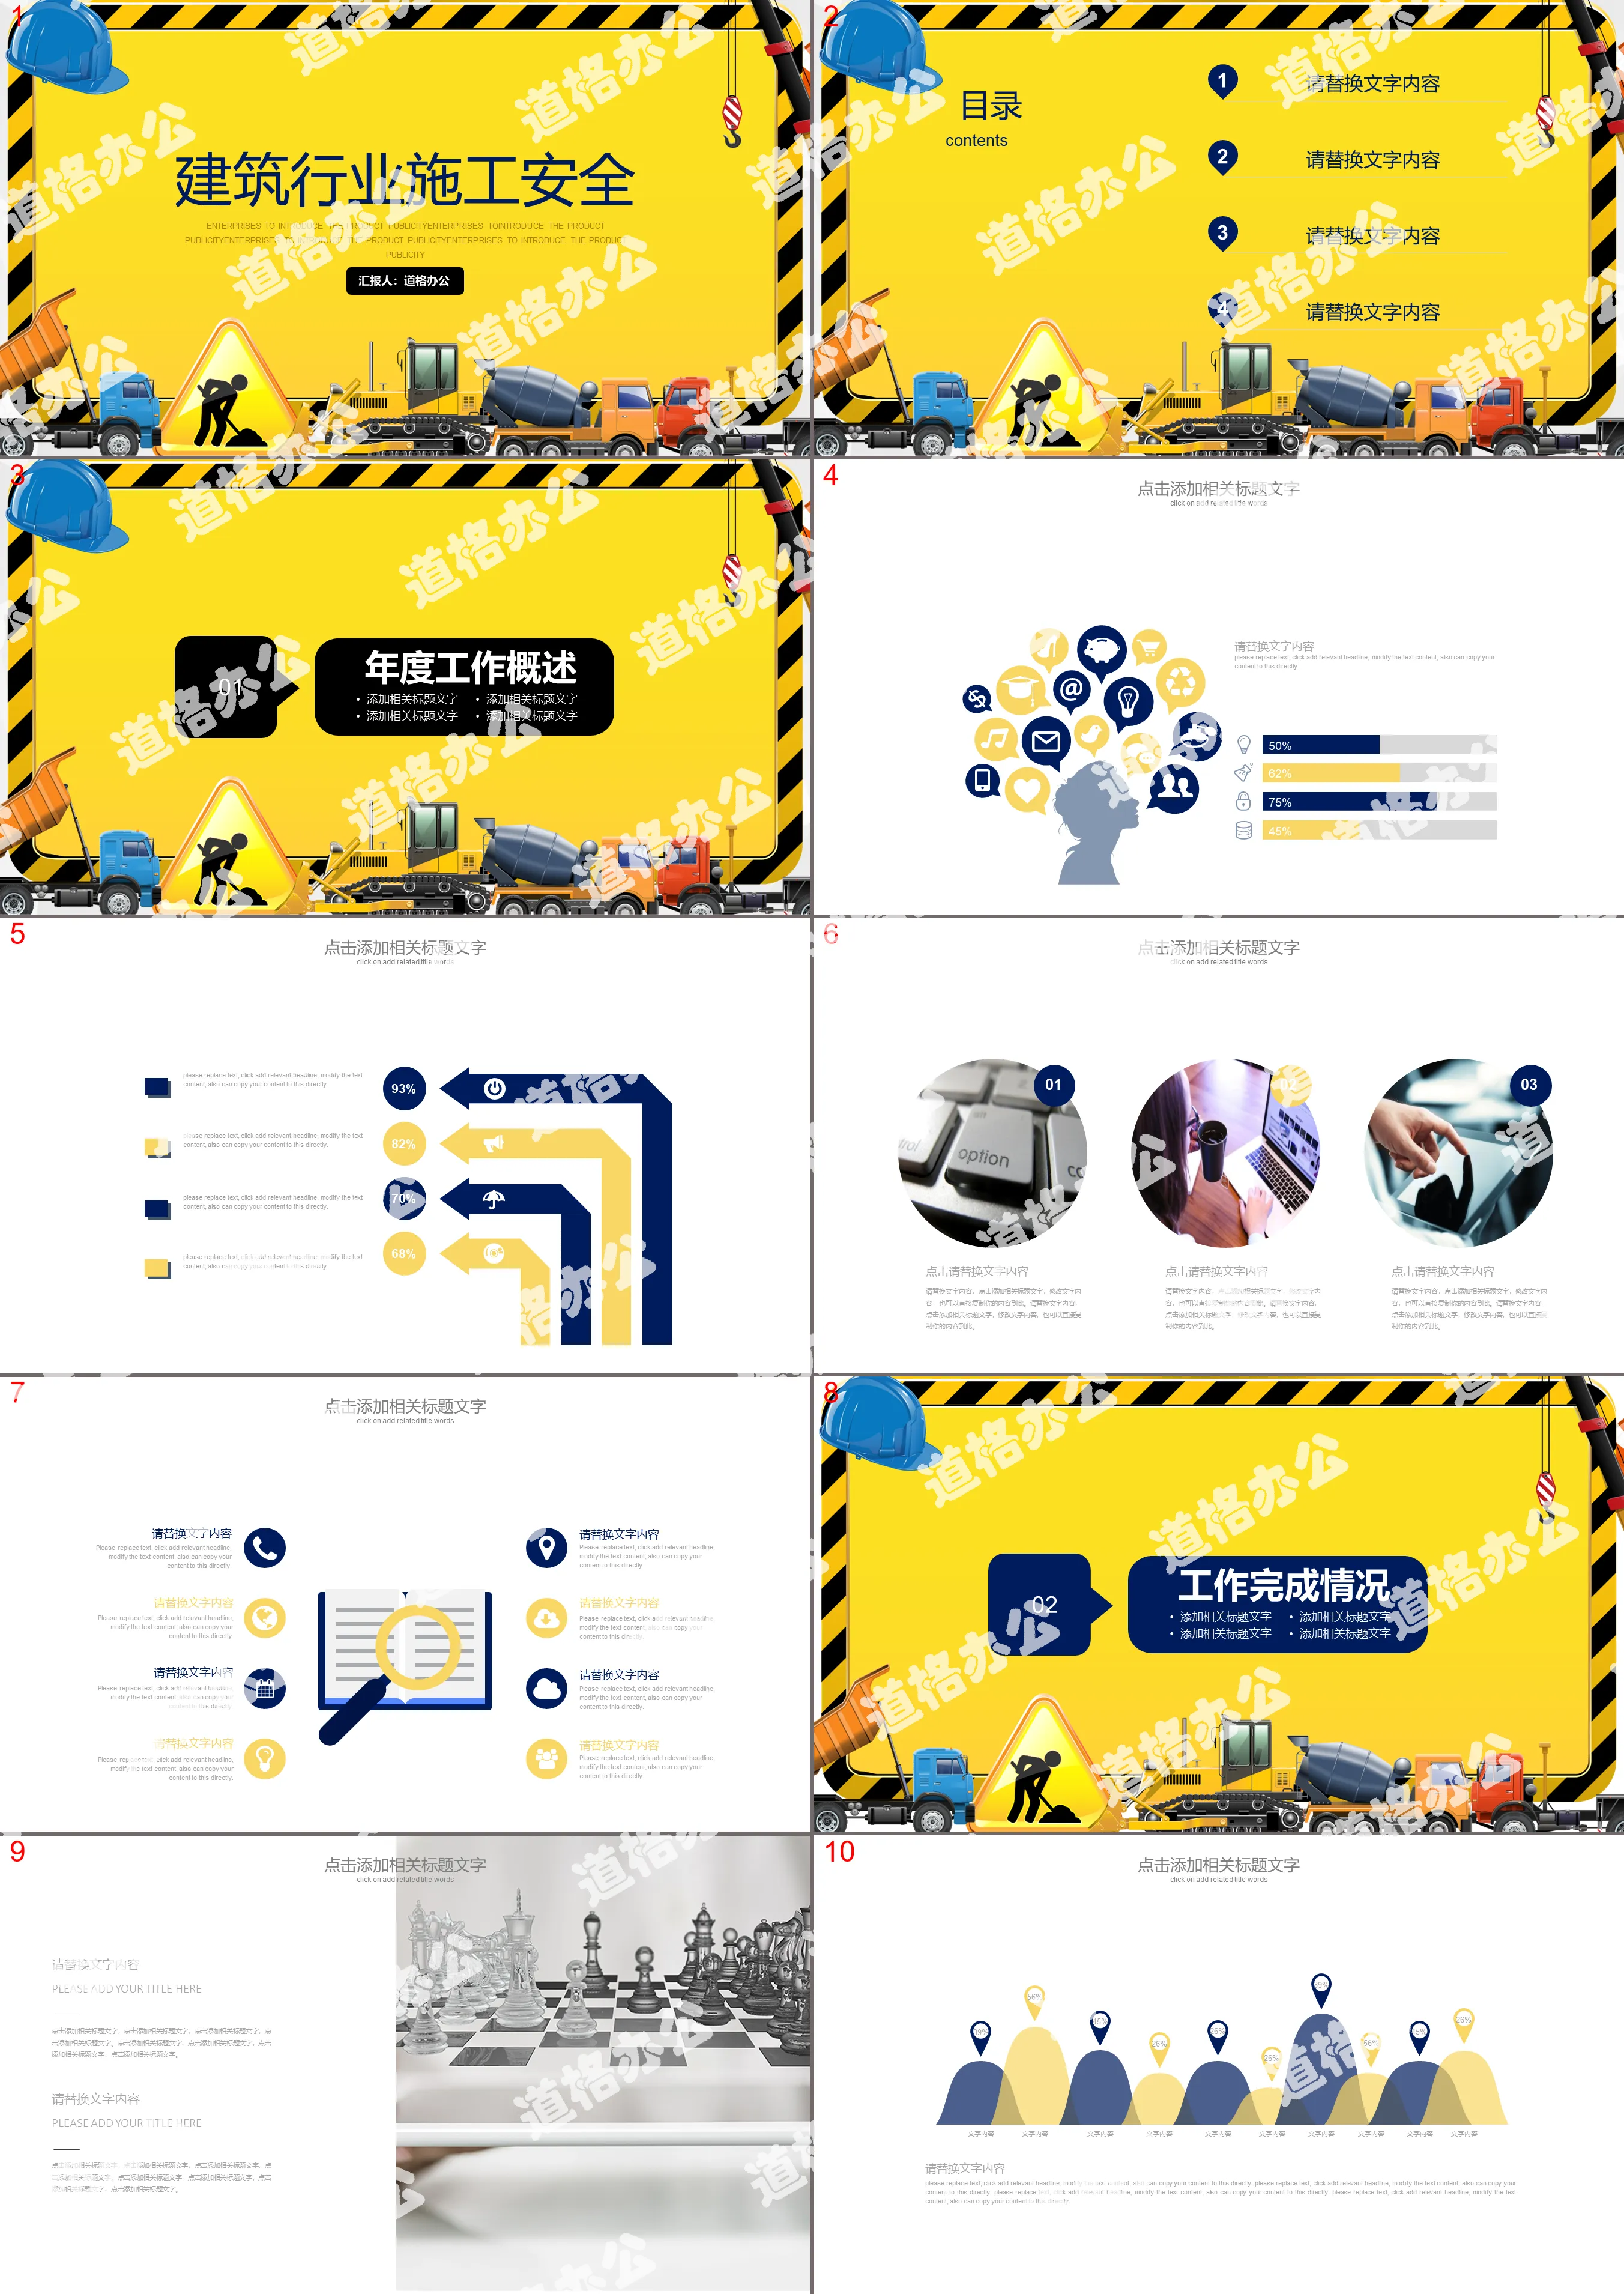 Construction industry safety construction PPT template